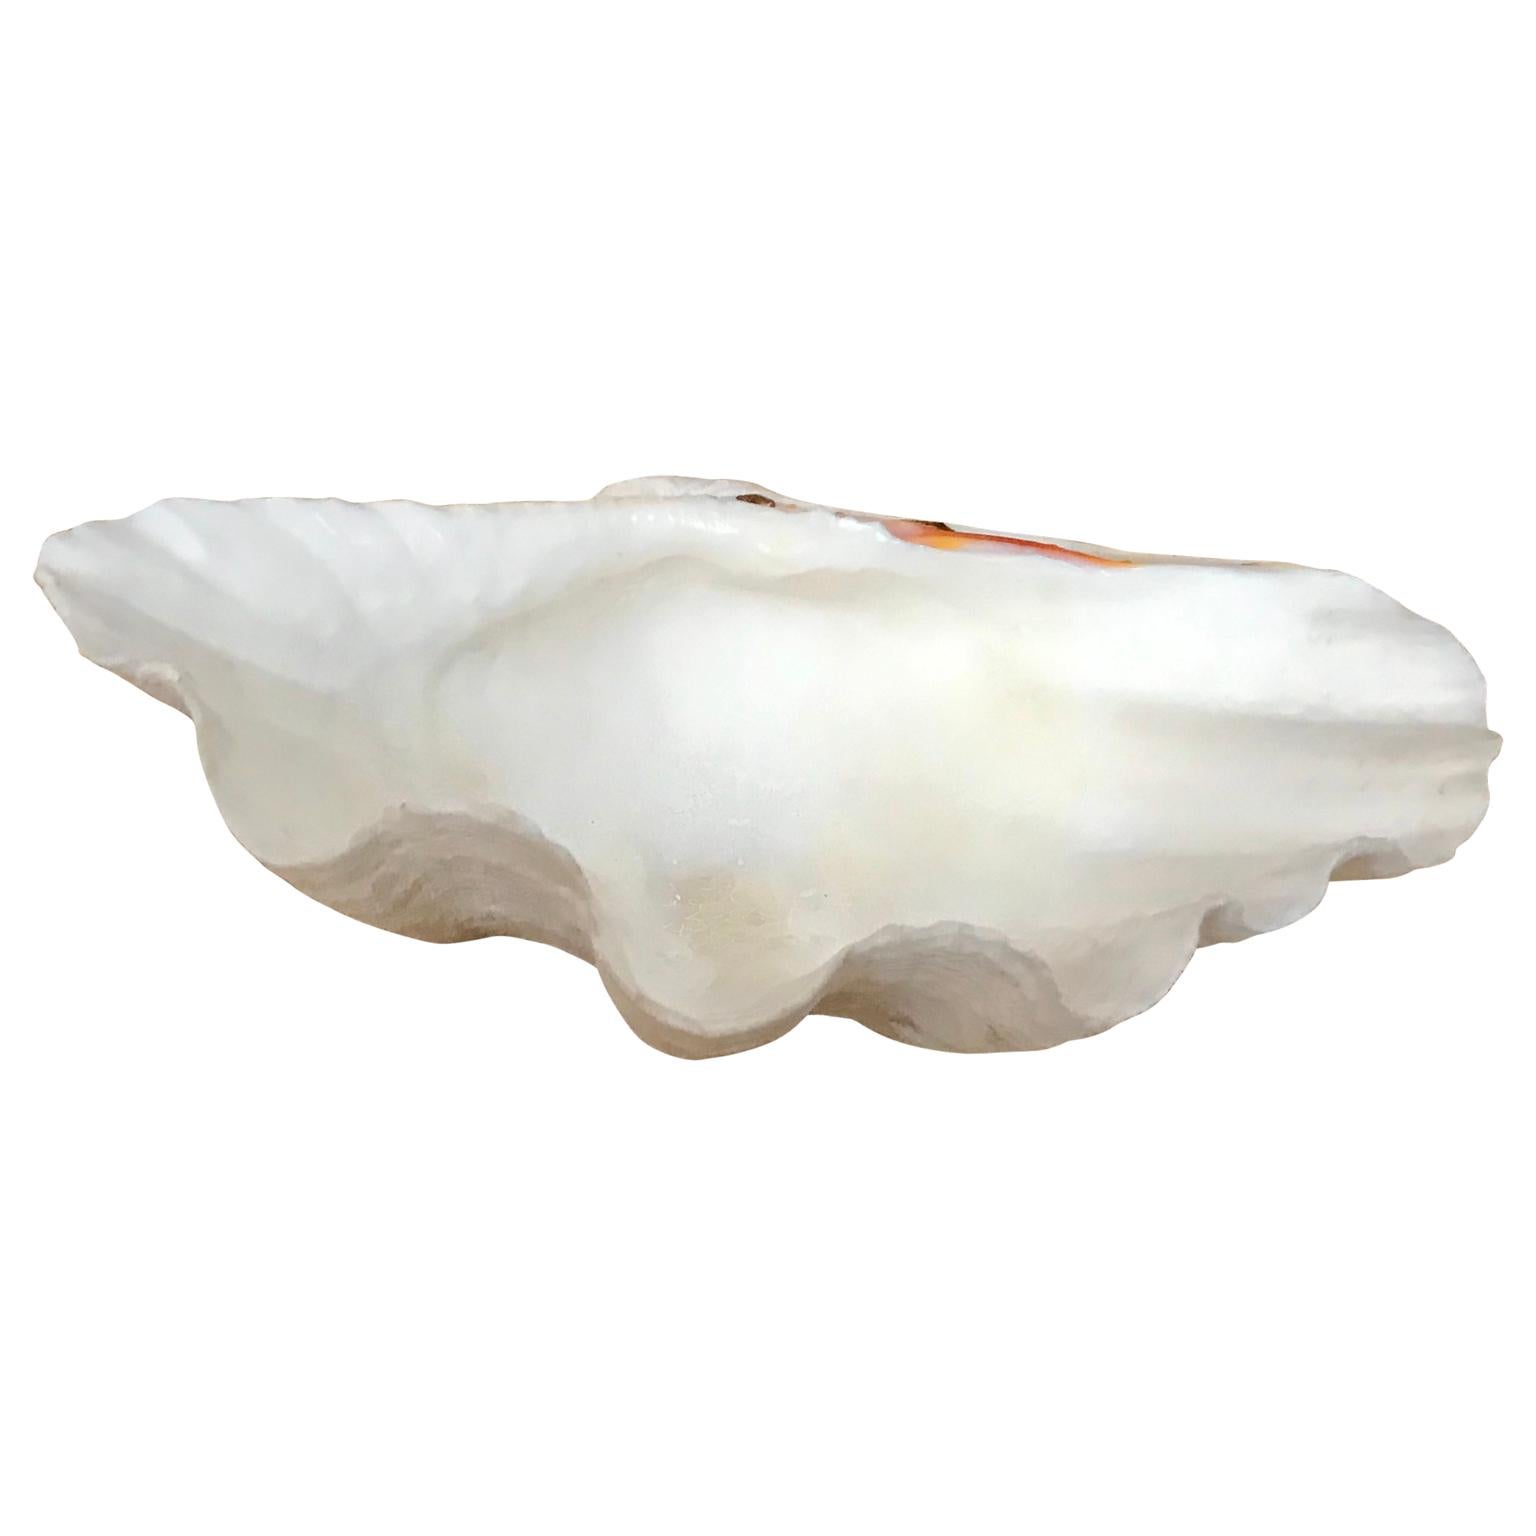 Pacific Islands Small South Pacific Tridacna Gigas Clam Trinket For Sale